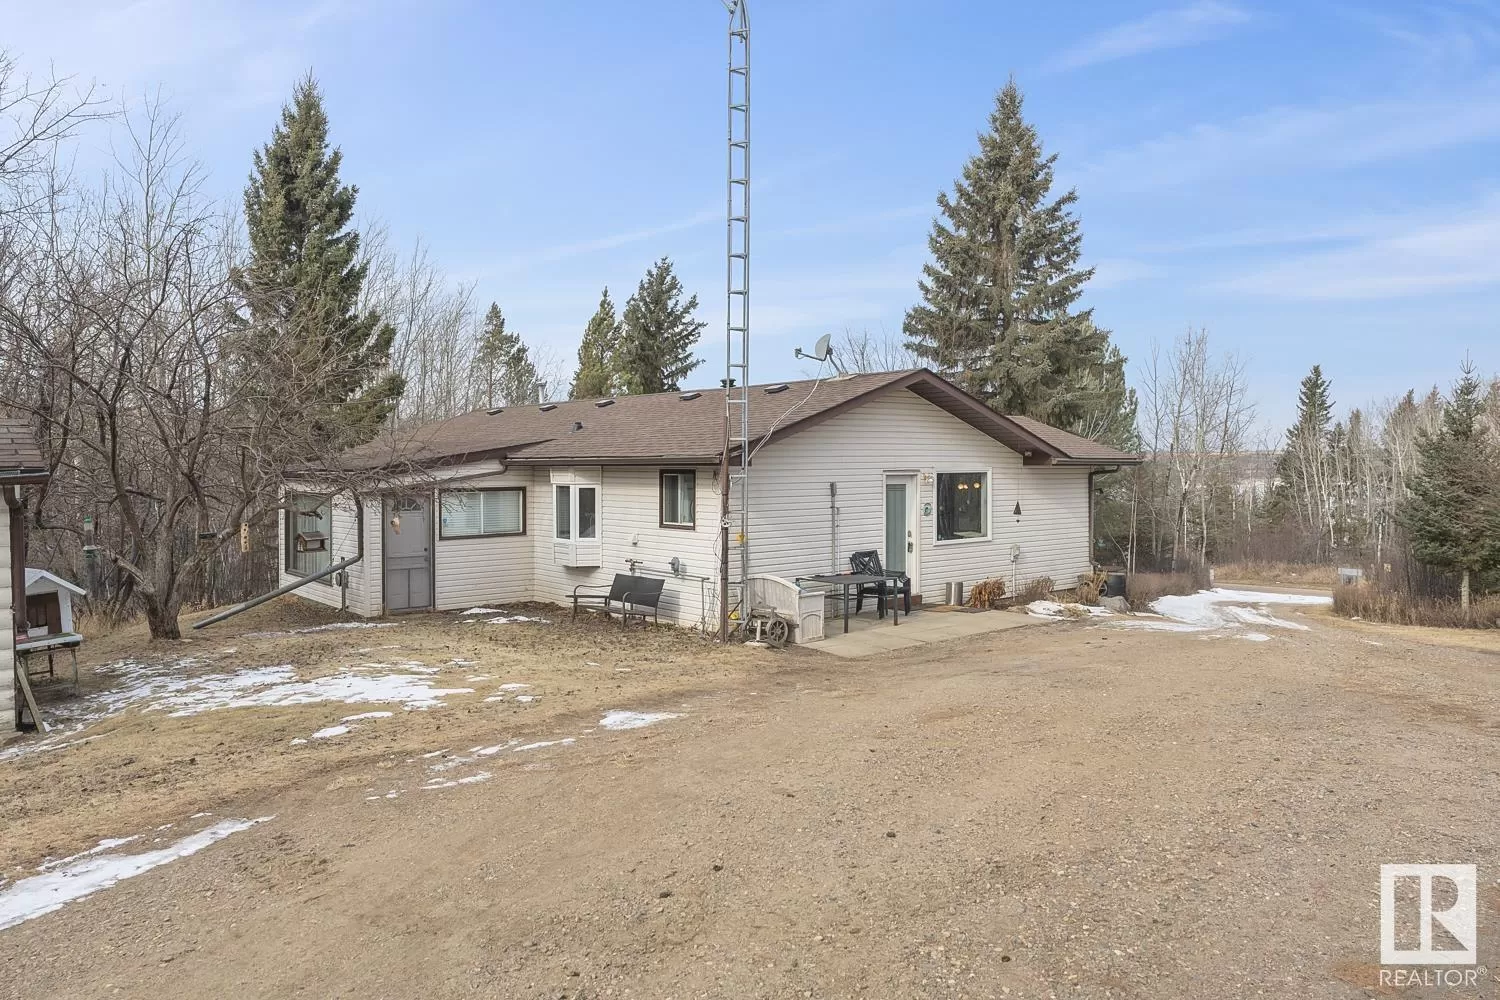 House for rent: 12279 Twp Rd 602, Rural Smoky Lake County, Alberta T0A 3E0